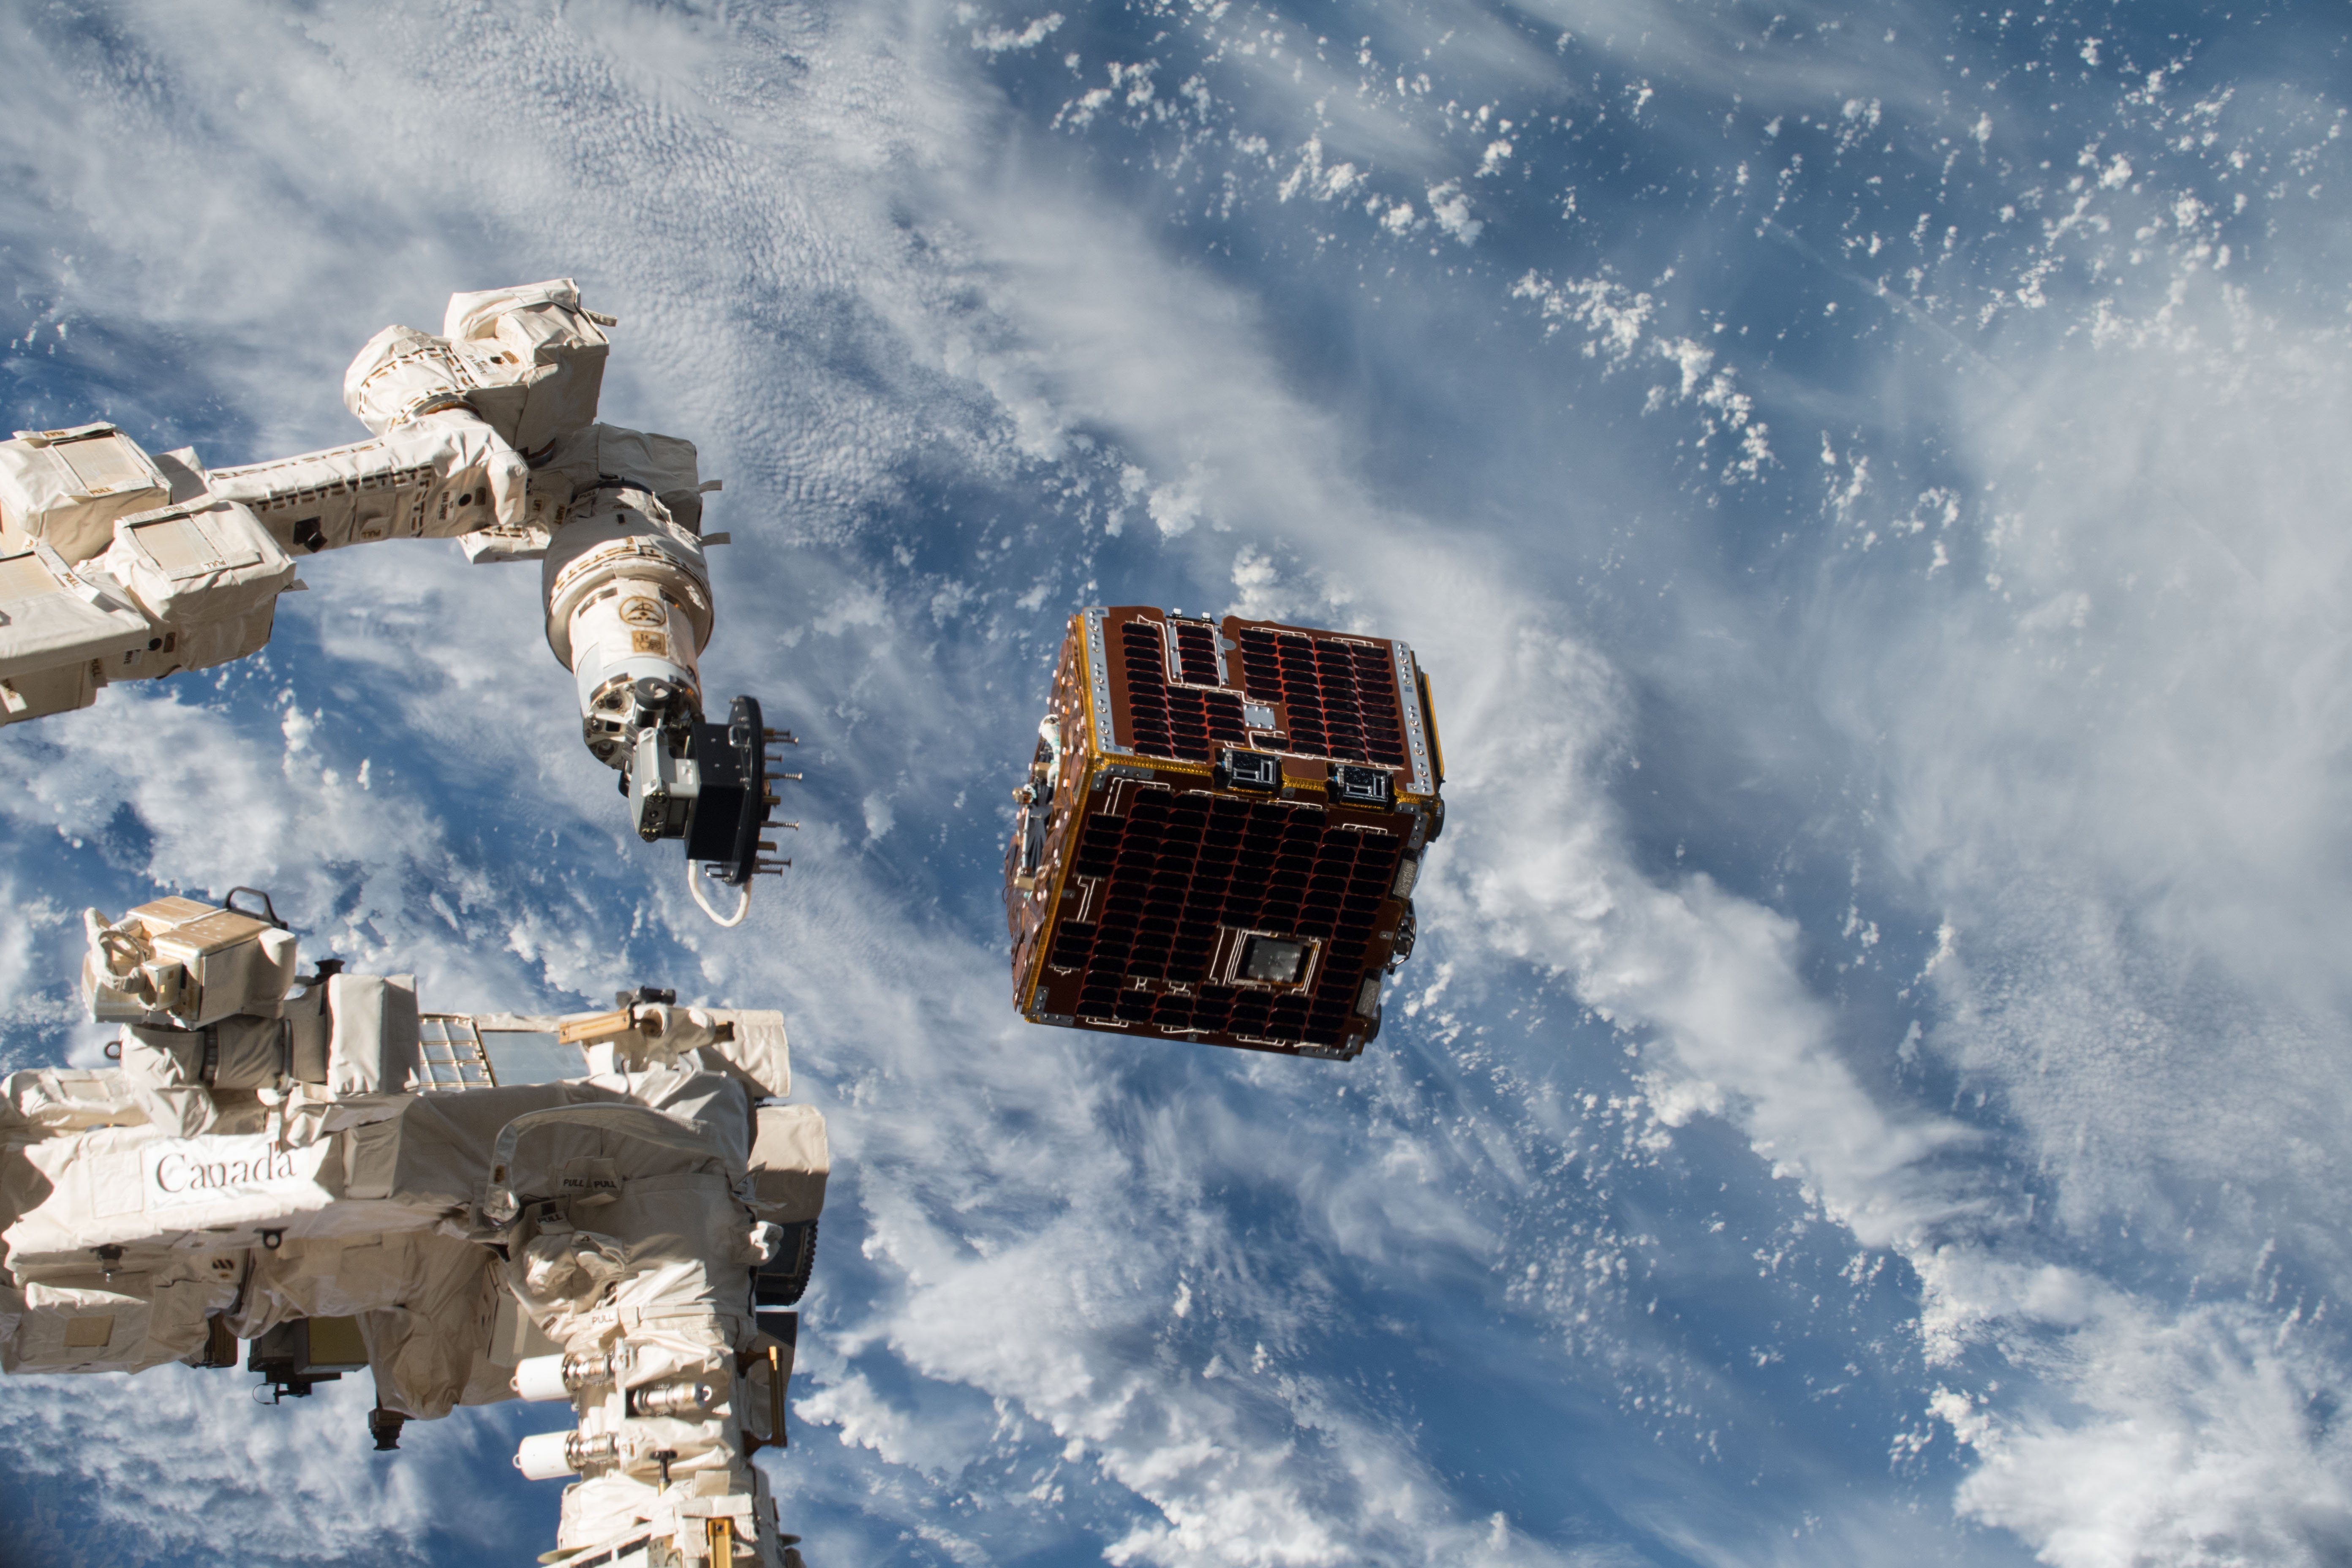 A red and black metal cube floats in space next to a white satellite arm. Behind the two objects is the Earth's cloud-filled atmosphere.